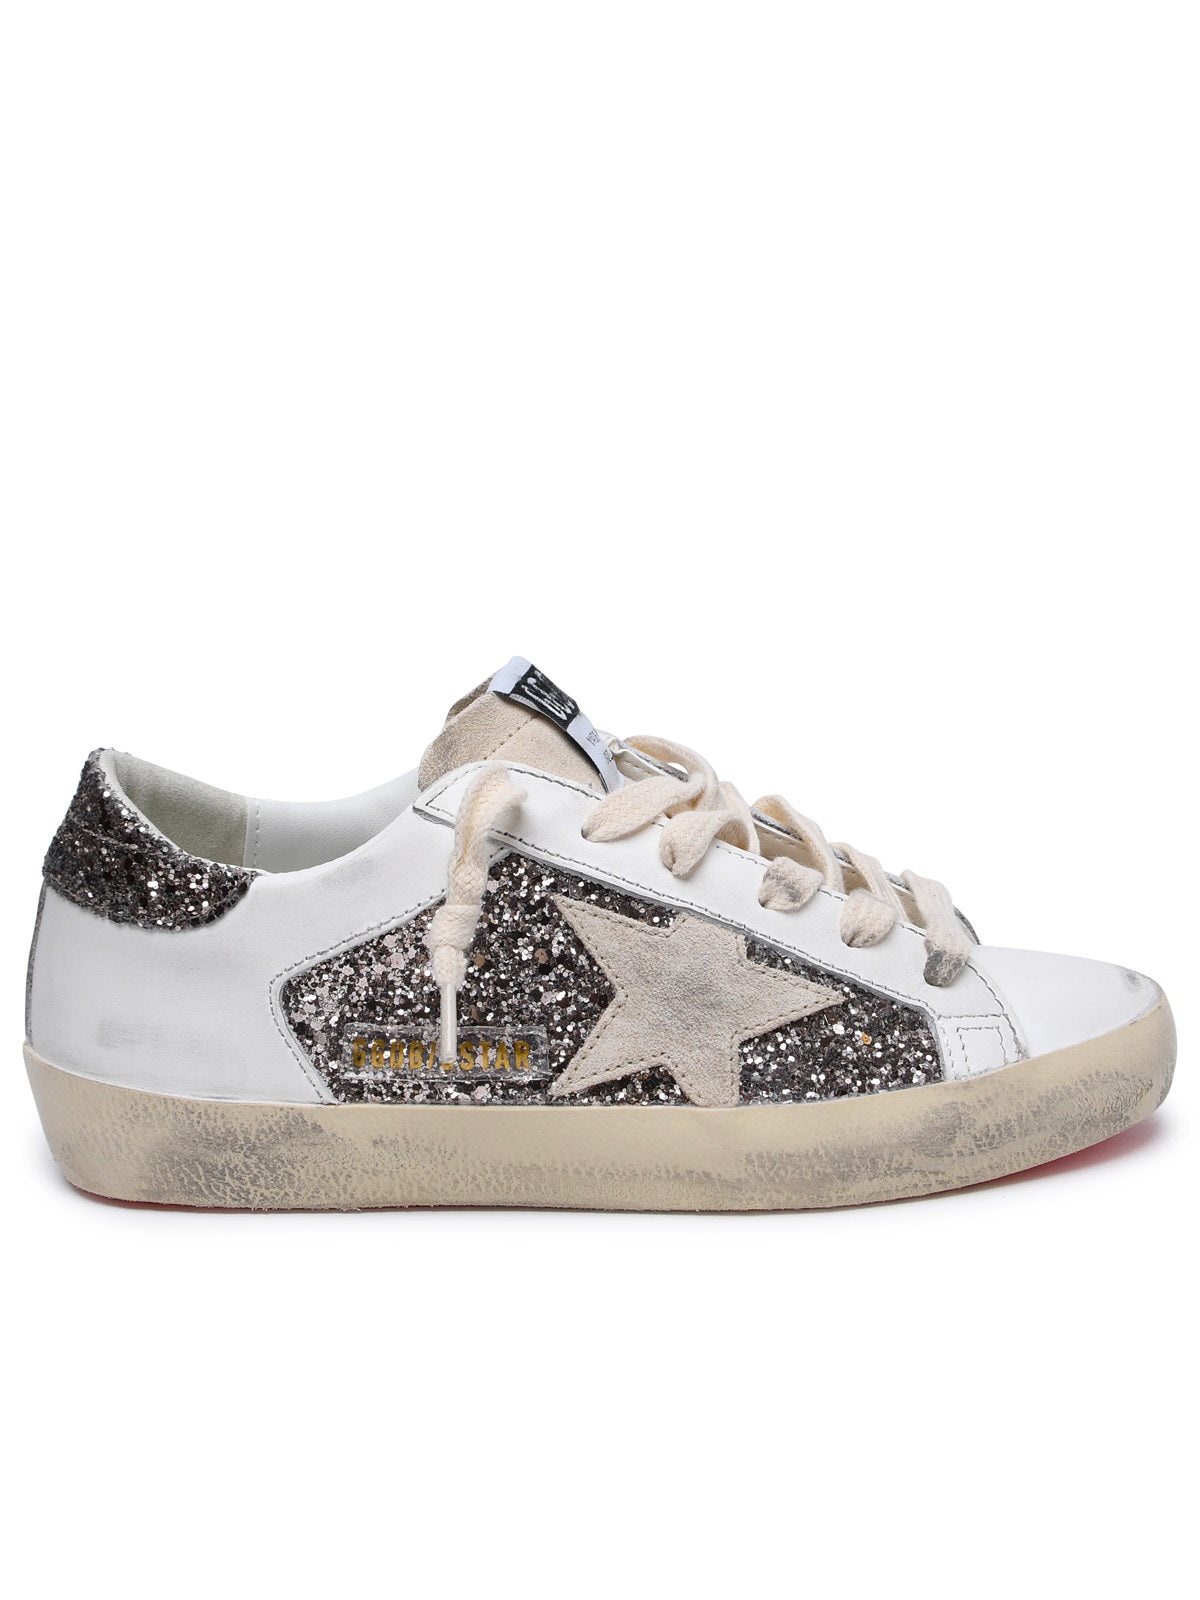 Golden Goose Woman Golden Goose 'Super-Star' White Leather Sneakers - 1